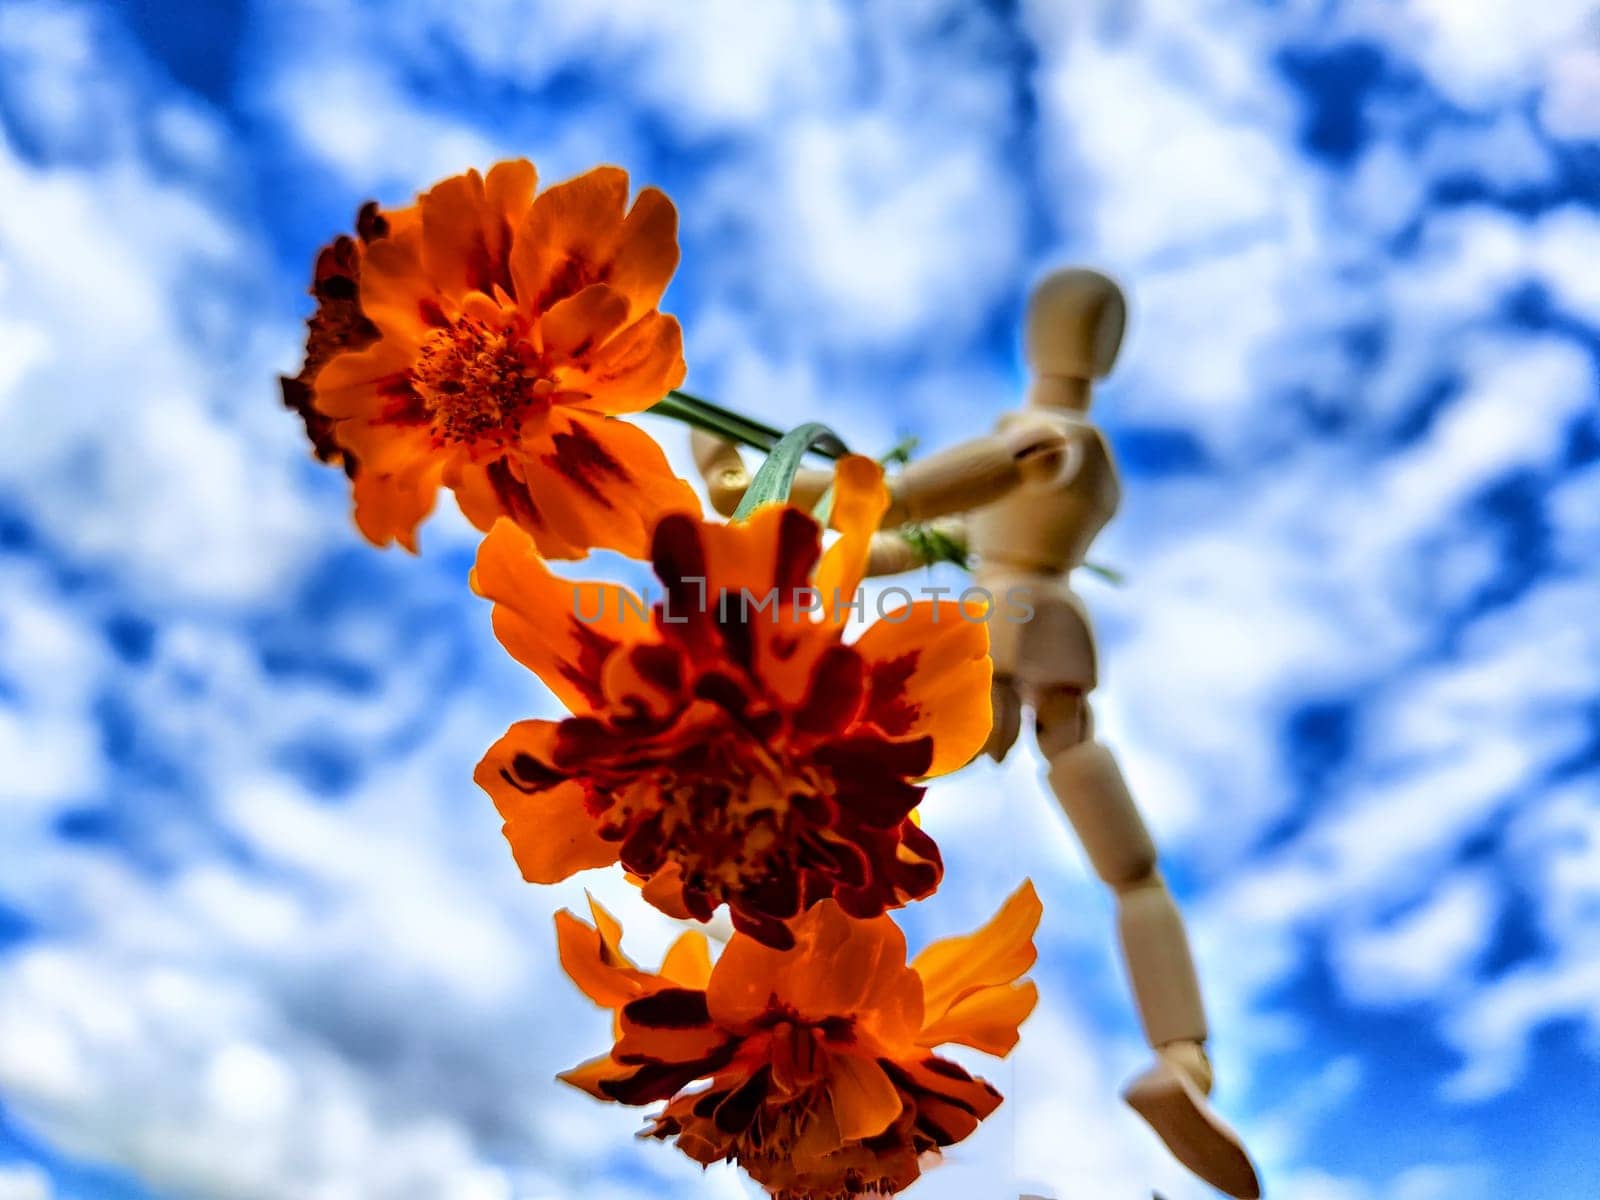 Wooden toy man with flowers and sky with white clouds on backgroudn. Concept of holiday, bouquet, Valentine's Day, proposal, engagement, declaration of love, Mother's Day. Caring, loving, romantic by keleny